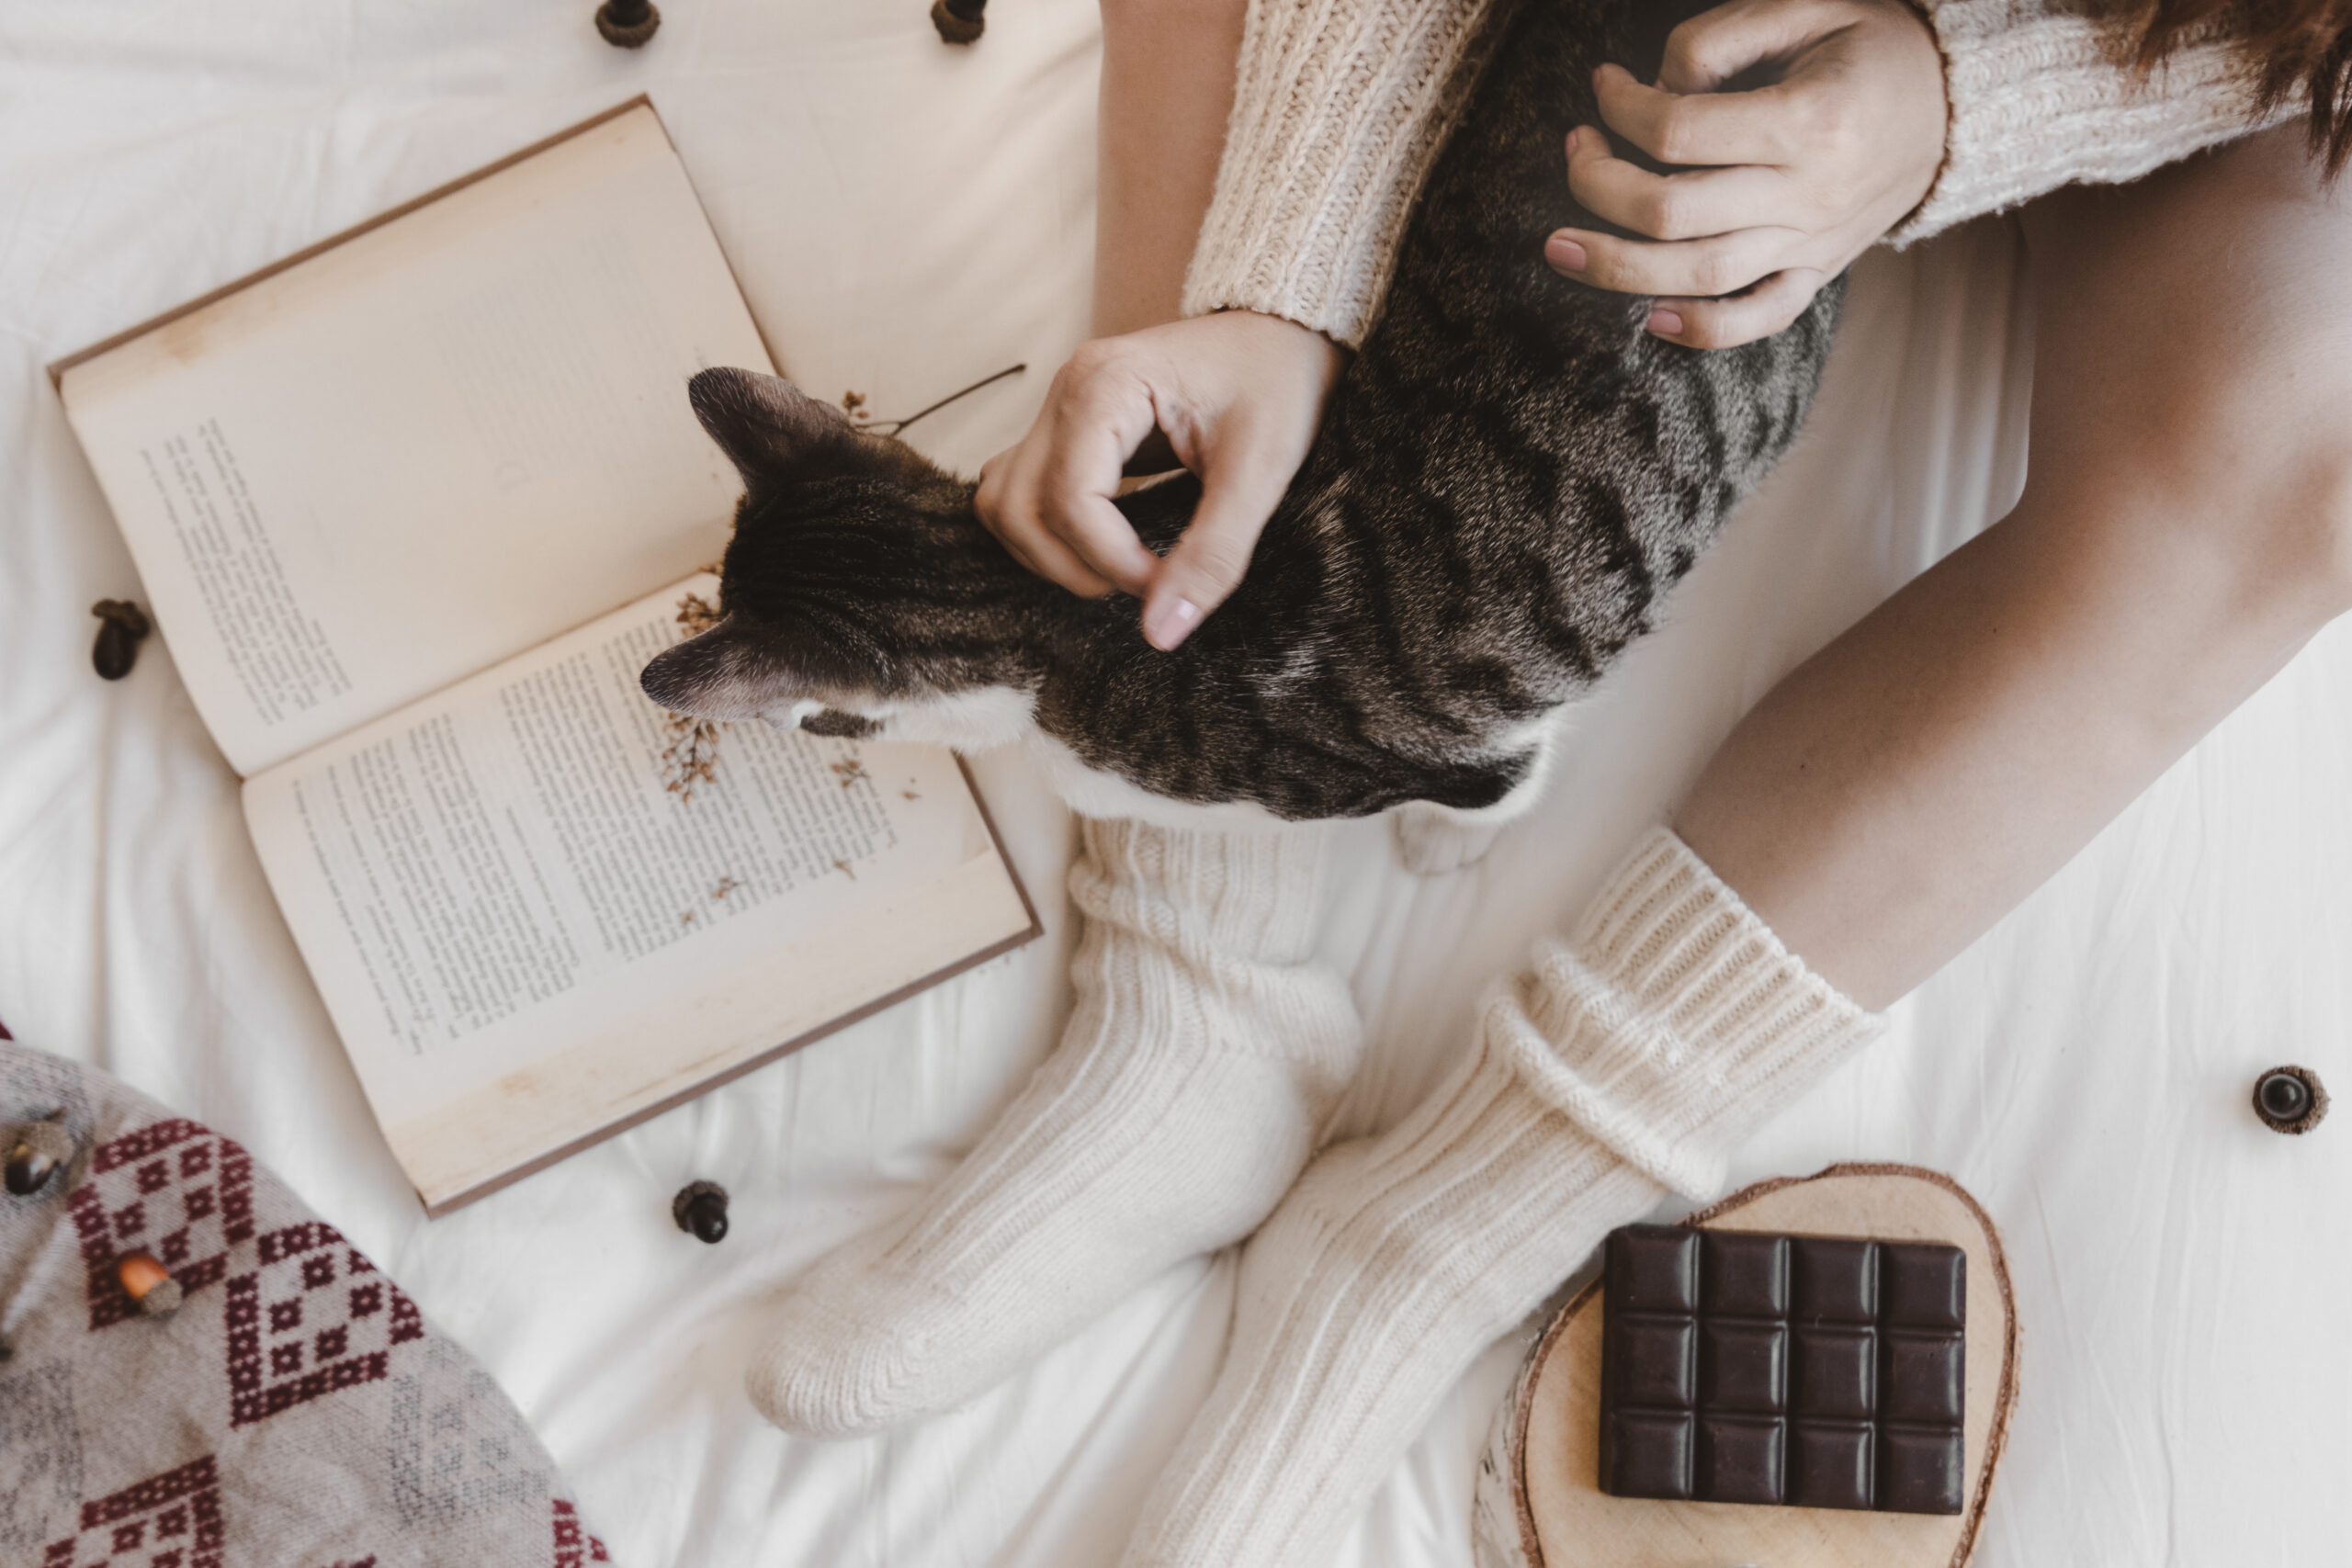 unrecognizable-lady-stroking-cat-near-book-chocolate